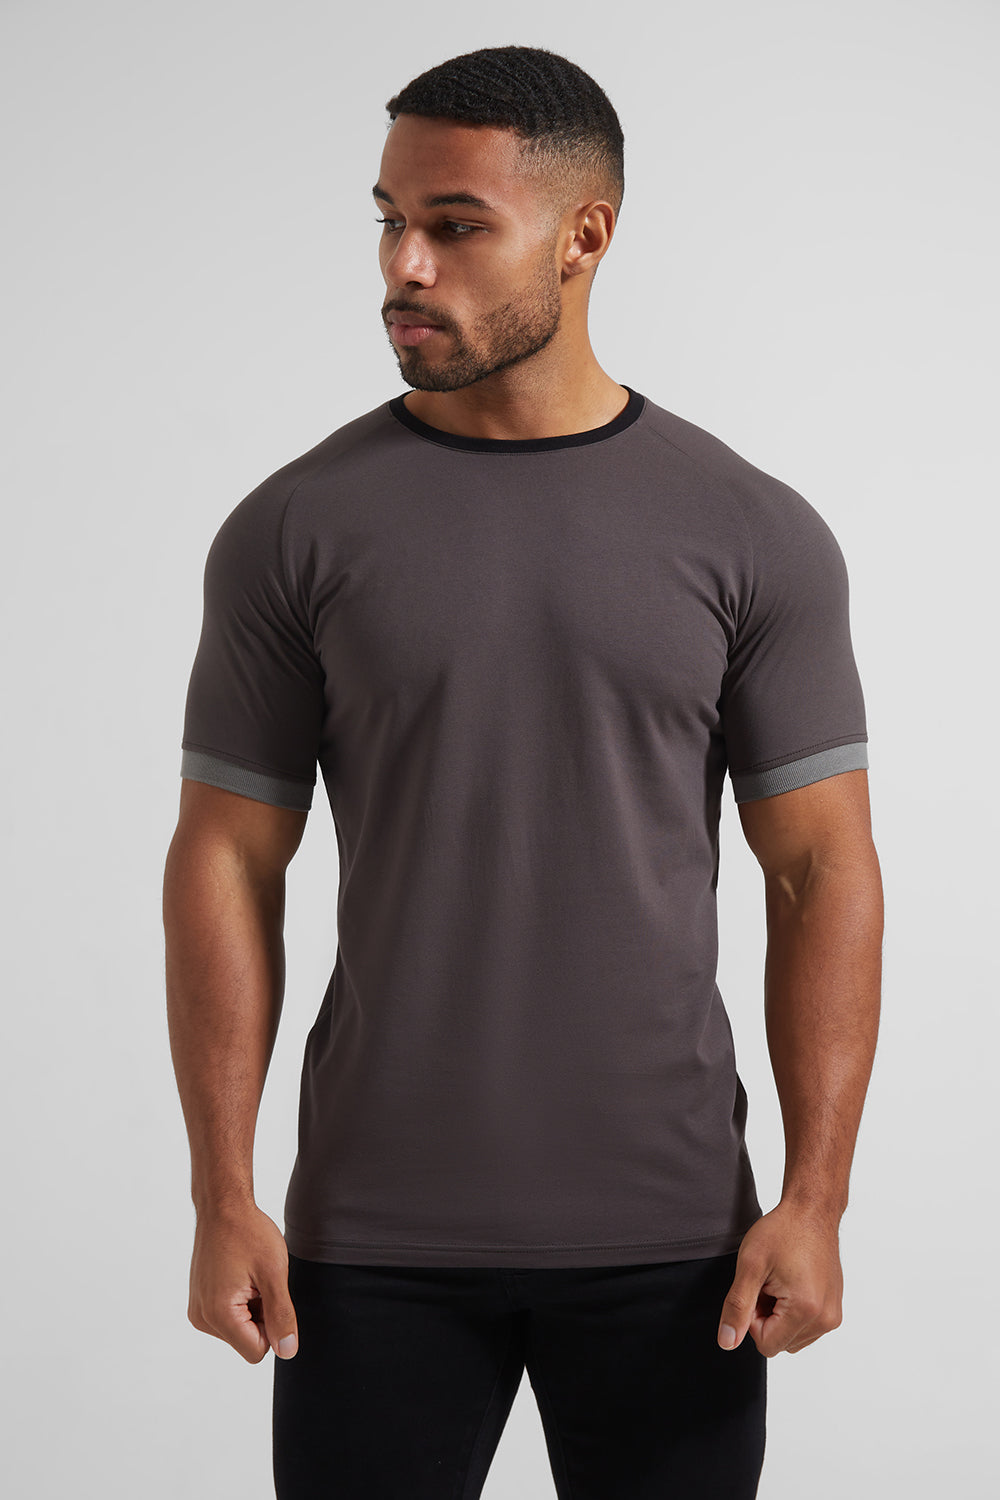 Contrast Trim T-Shirt in Charcoal - TAILORED ATHLETE - ROW